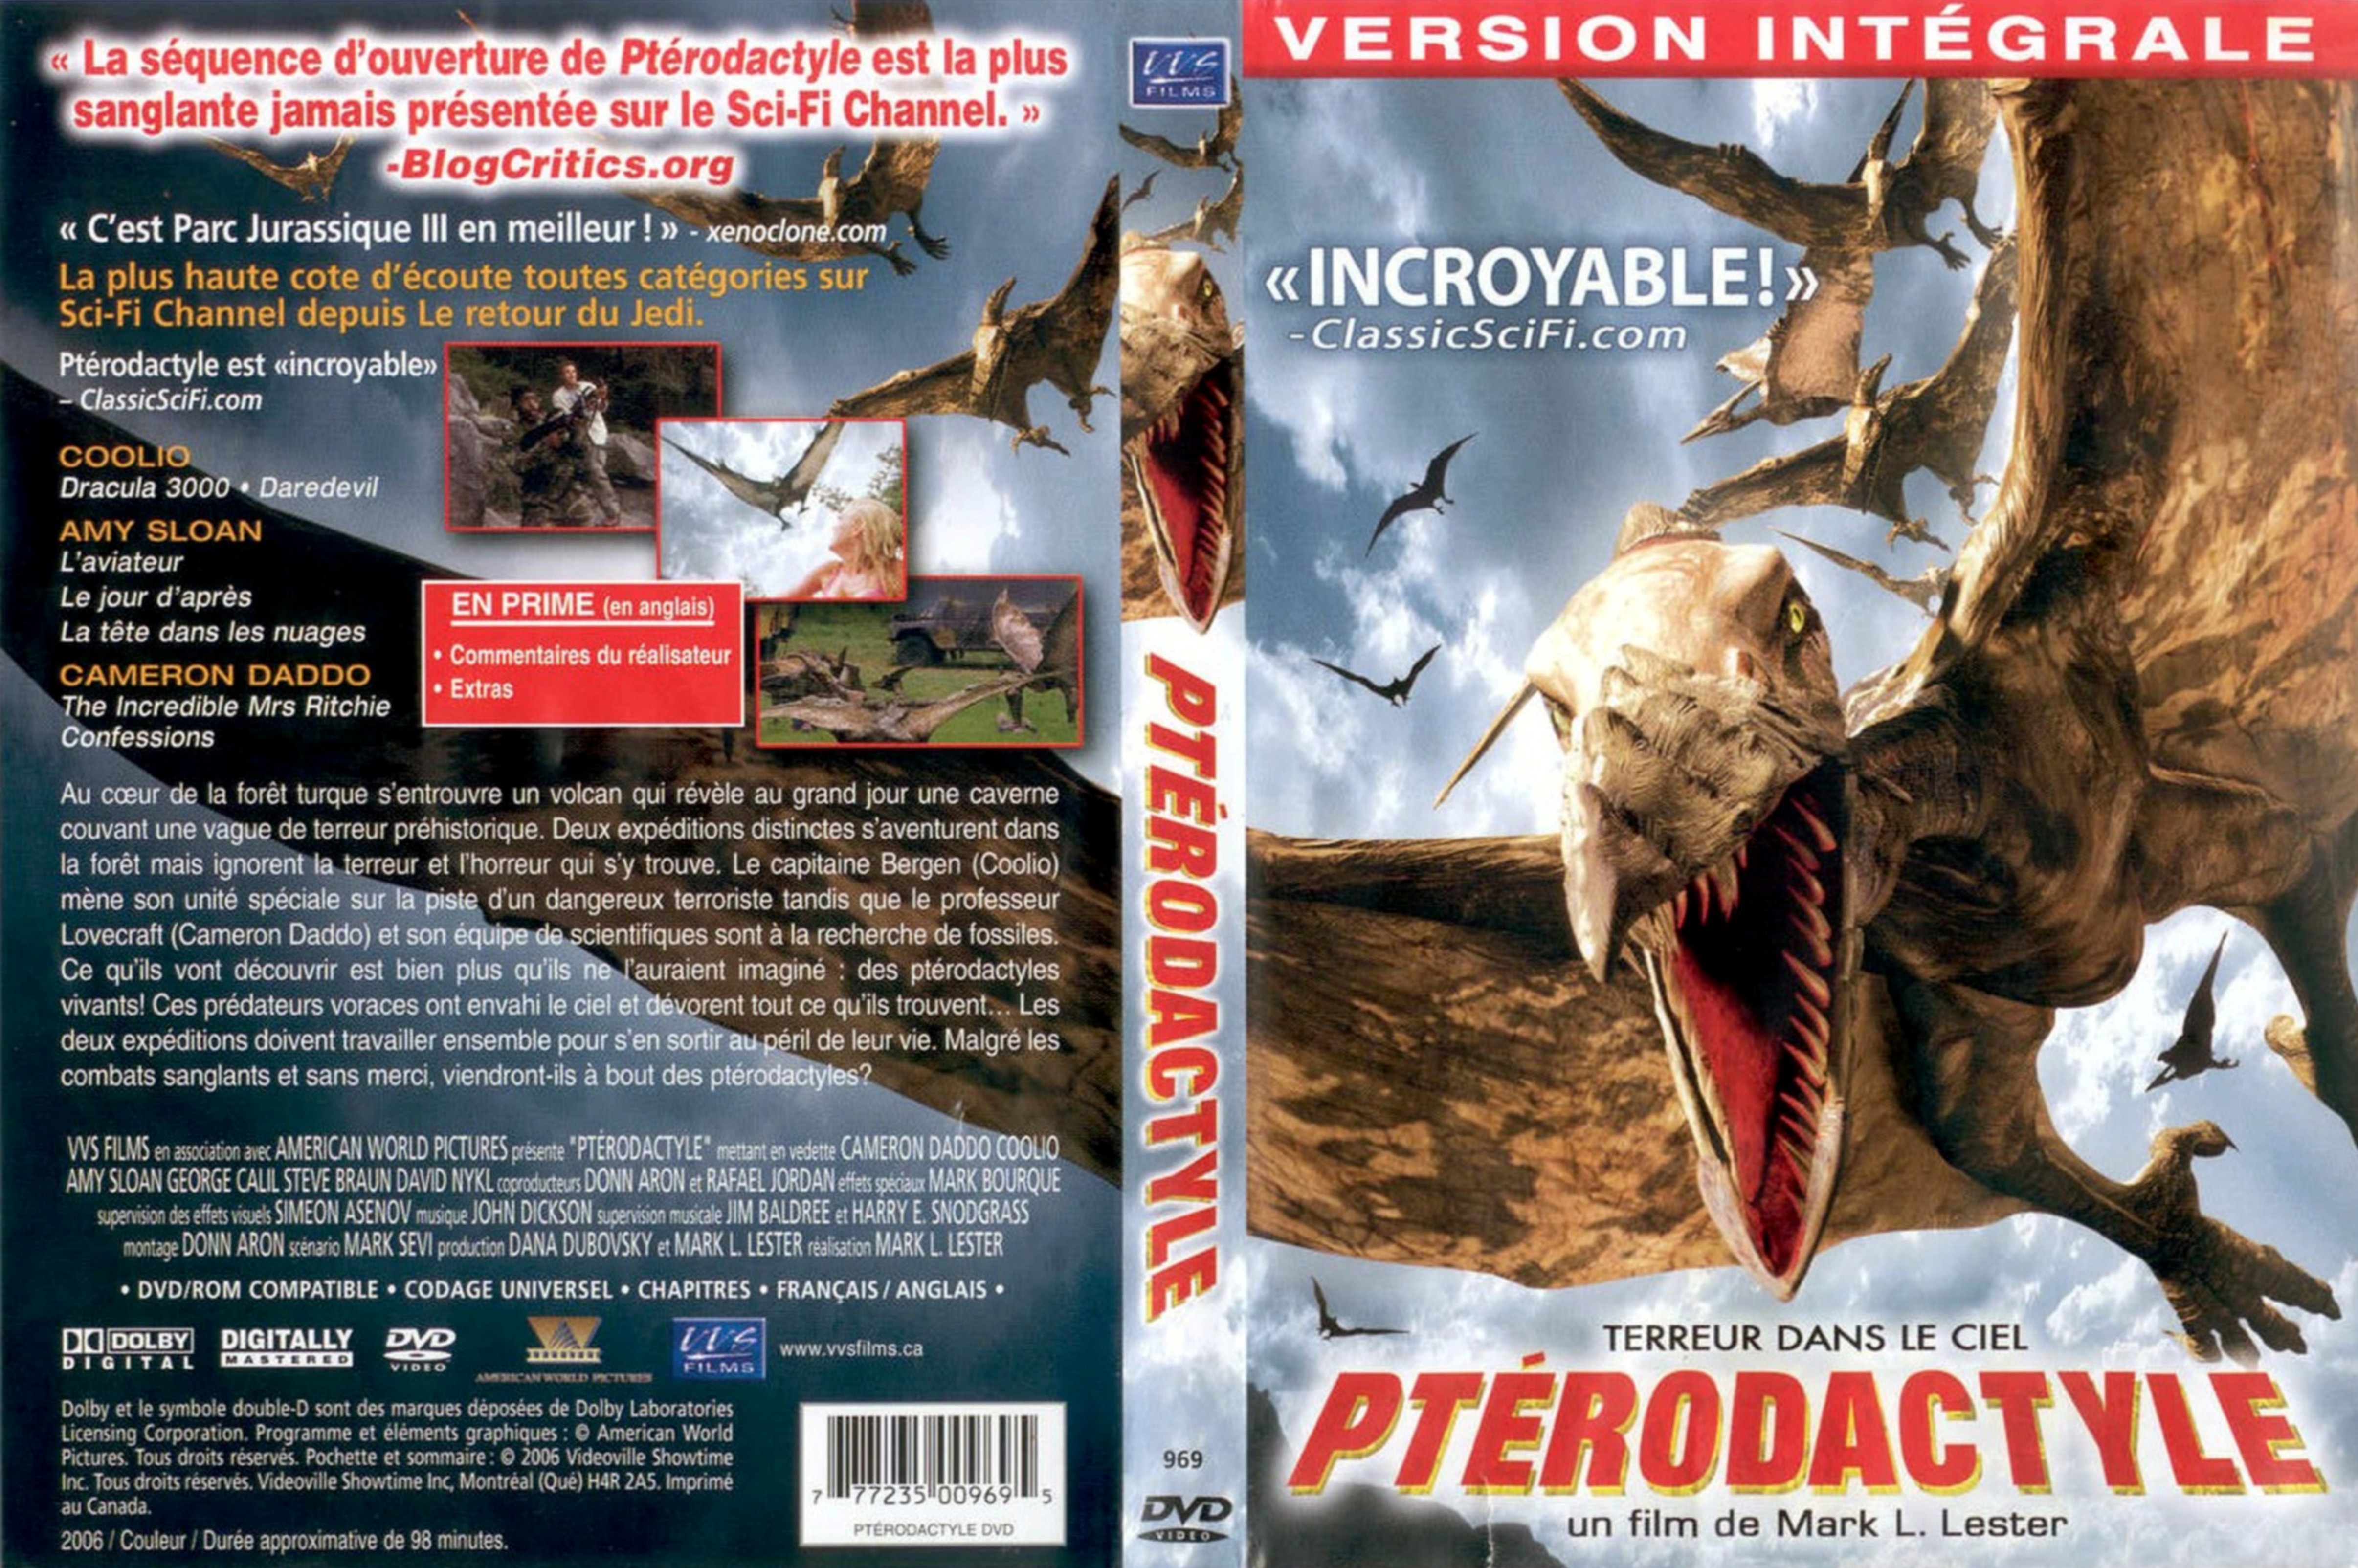 Jaquette DVD Pterodactyle